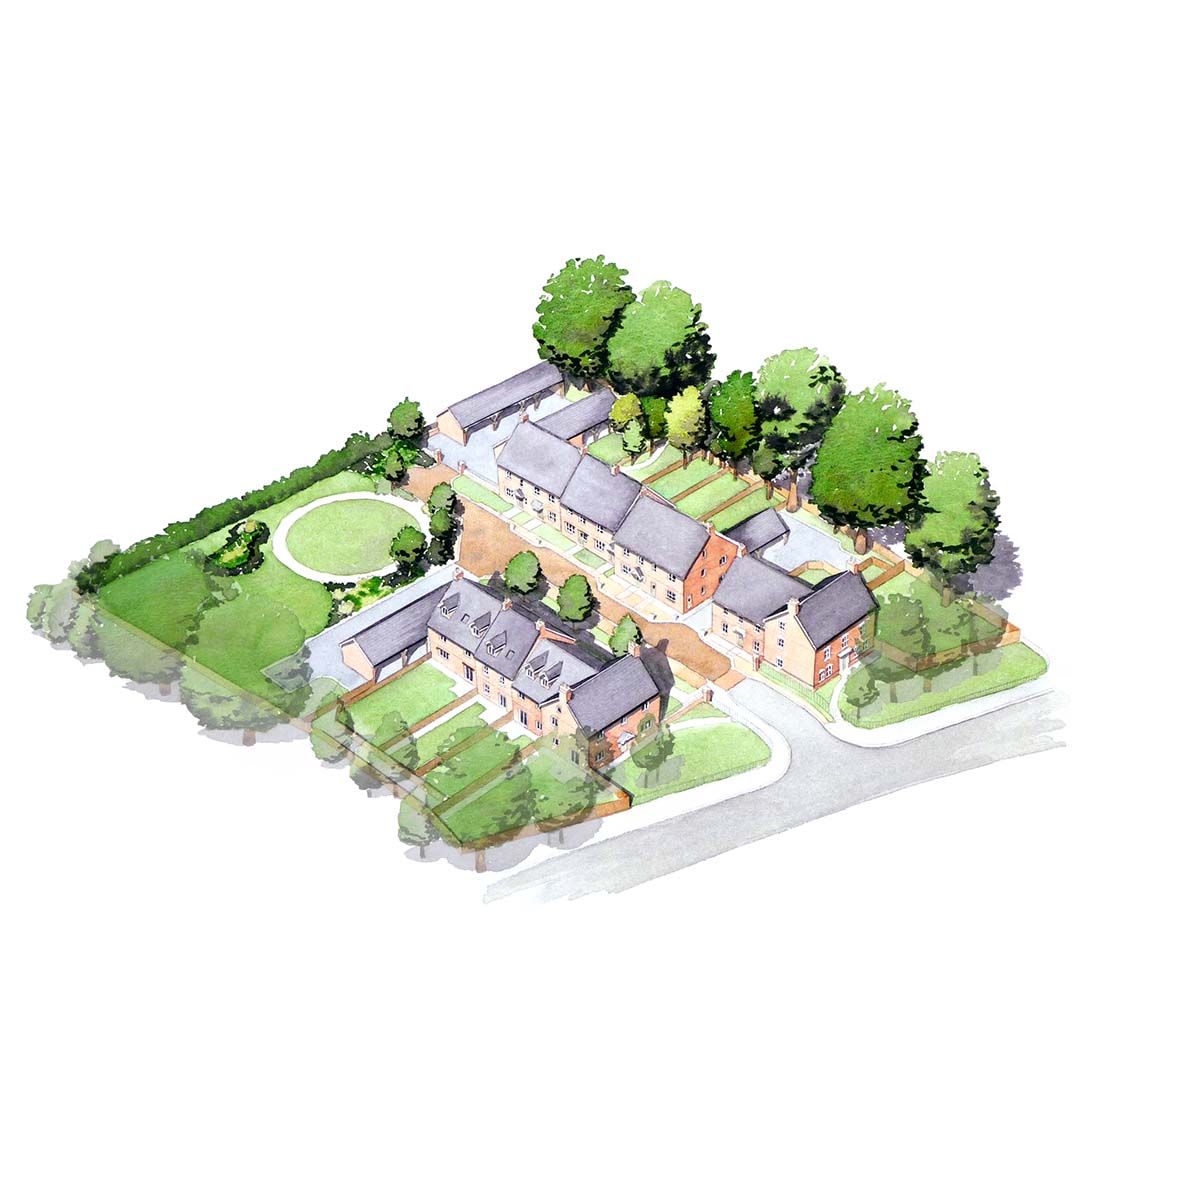 Artist impression of a site plan in watercolour site development. illustration of a housing site artist impression in watercolour